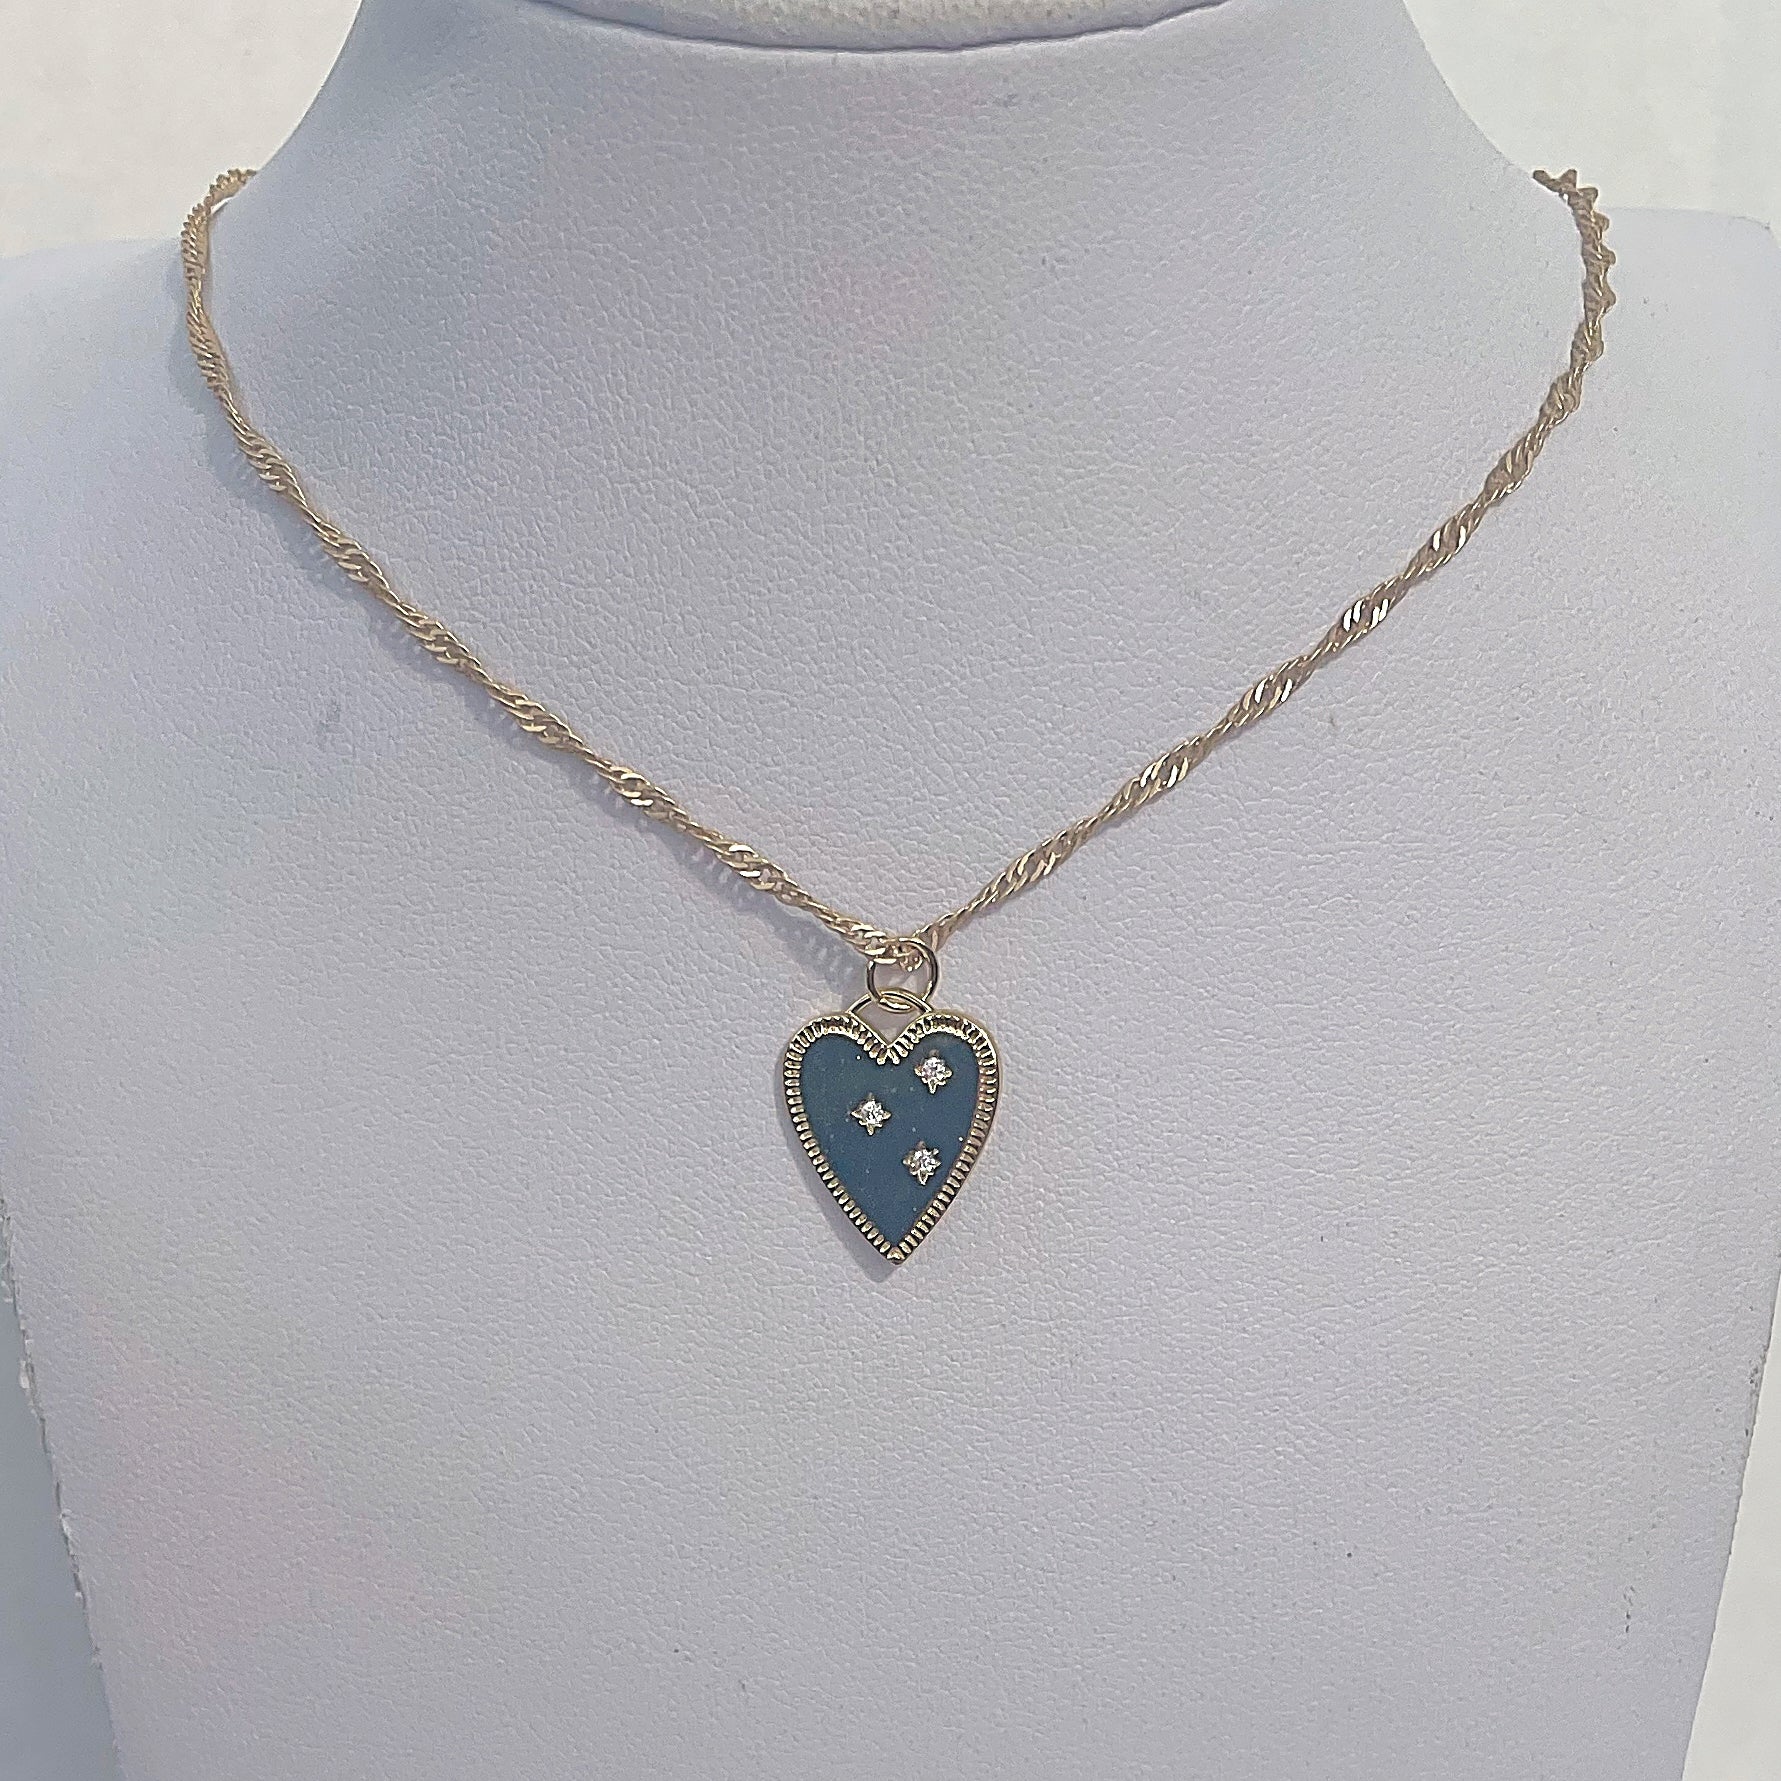 “Heart of Gold” Necklace